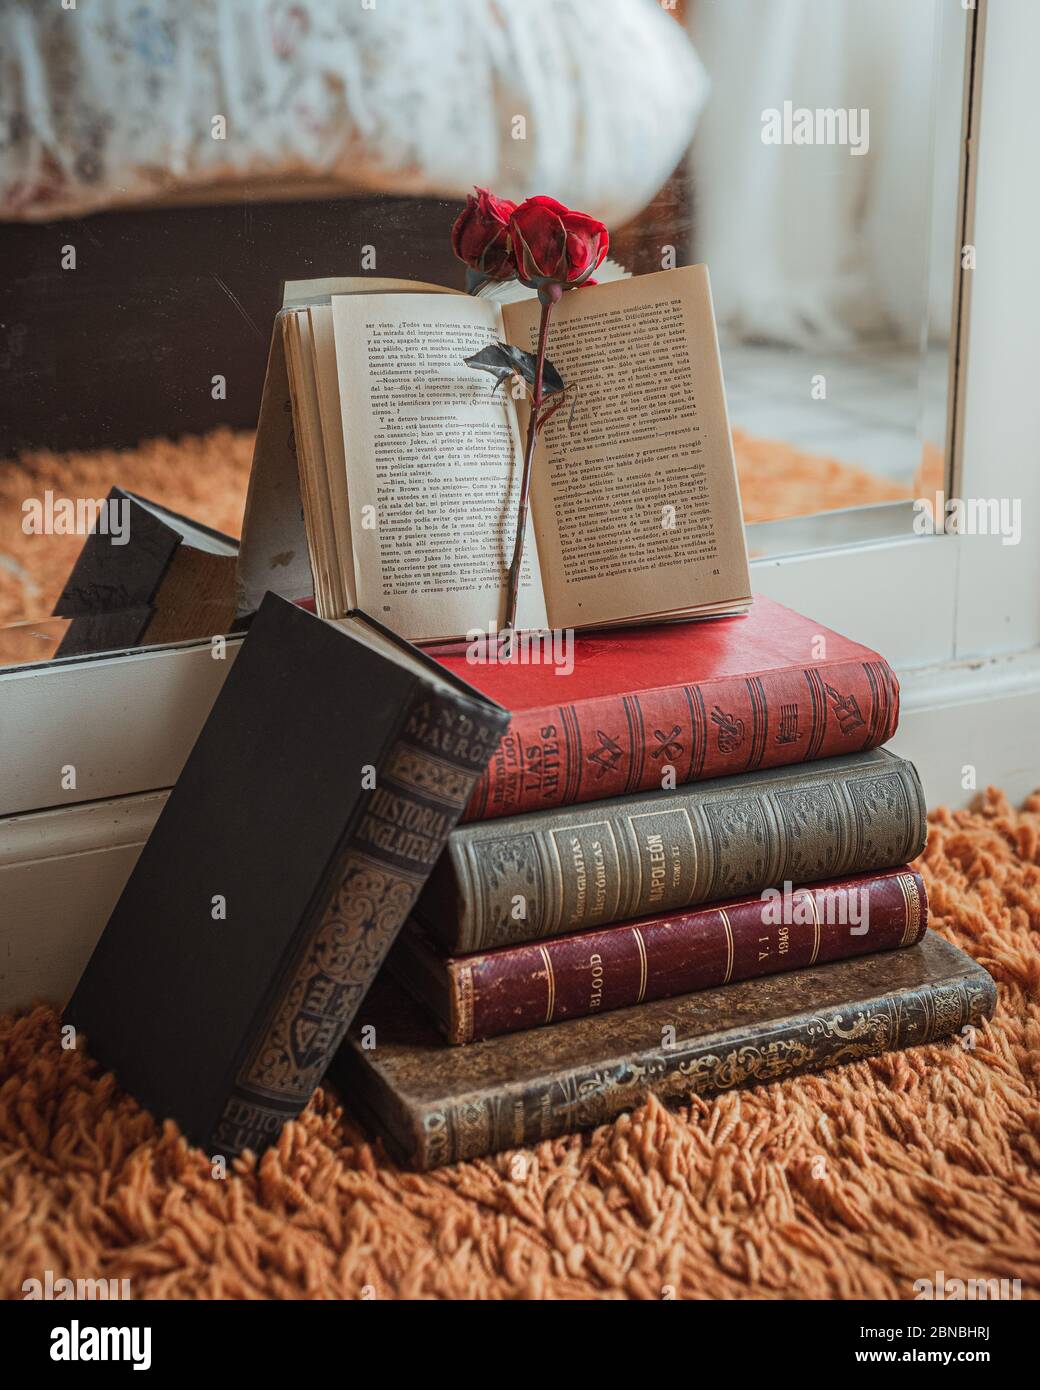 Red rose inside an open book on top of a pile of books Stock Photo